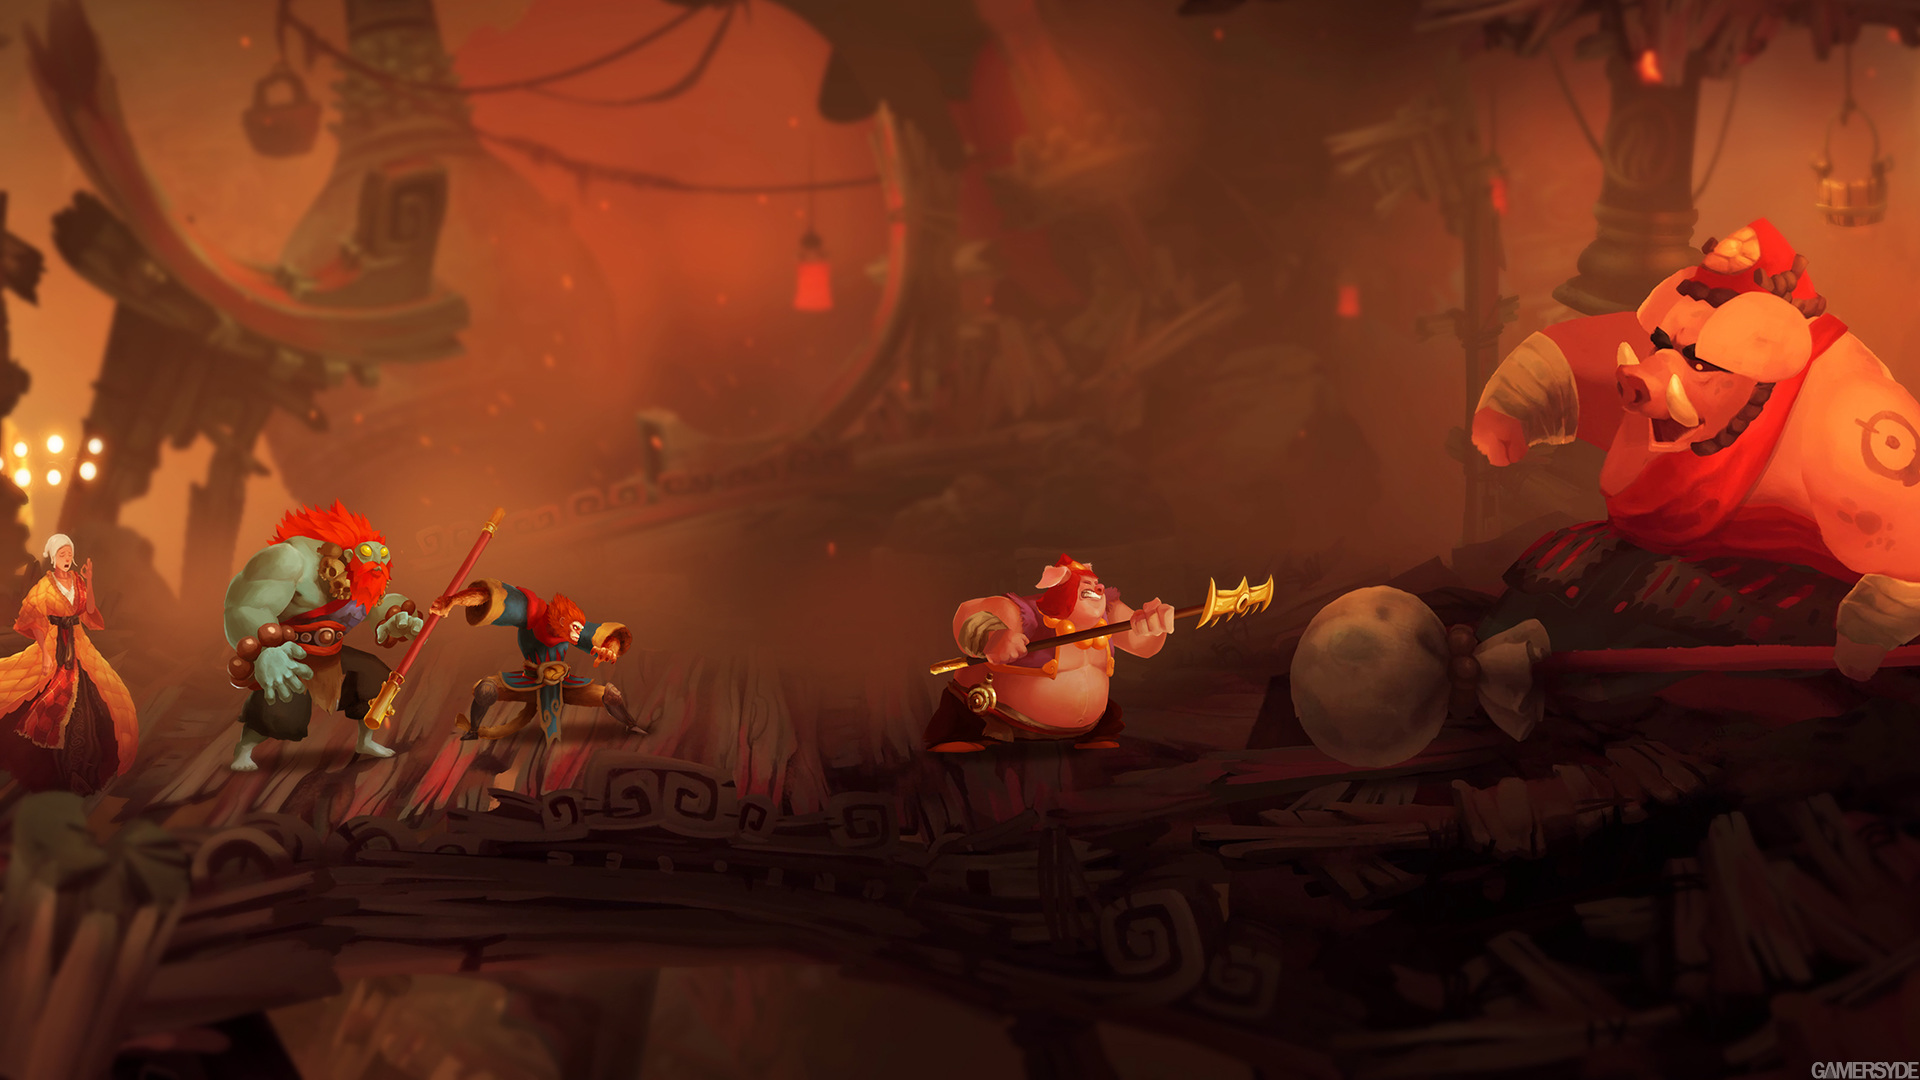 Rayman Legends - Trailer (FR) - High quality stream and download - Gamersyde